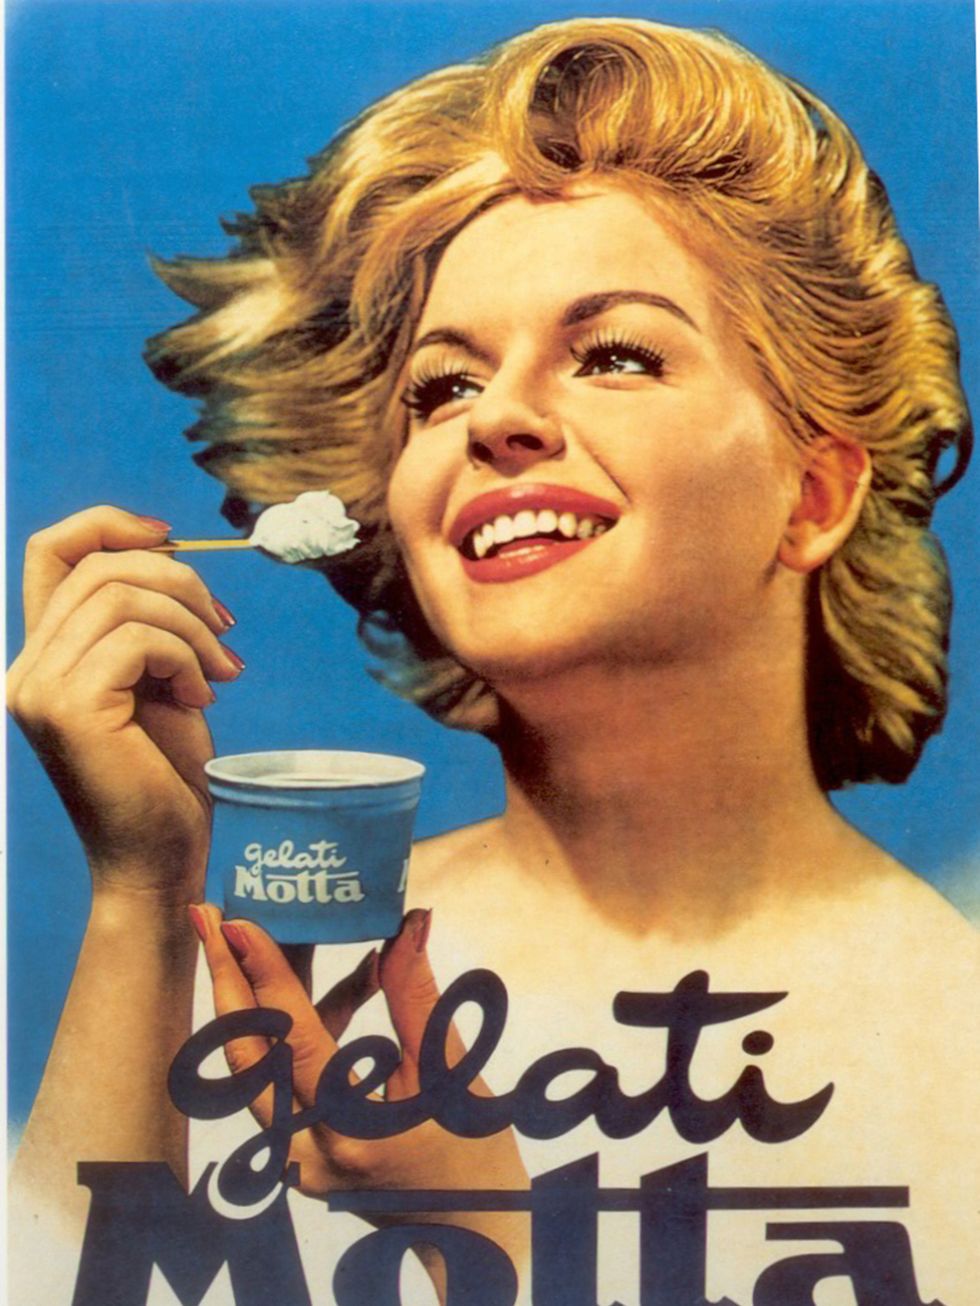 Hairstyle, Eyebrow, Tooth, Style, Jaw, Eyelash, Blond, Brown hair, Poster, Vintage advertisement, 